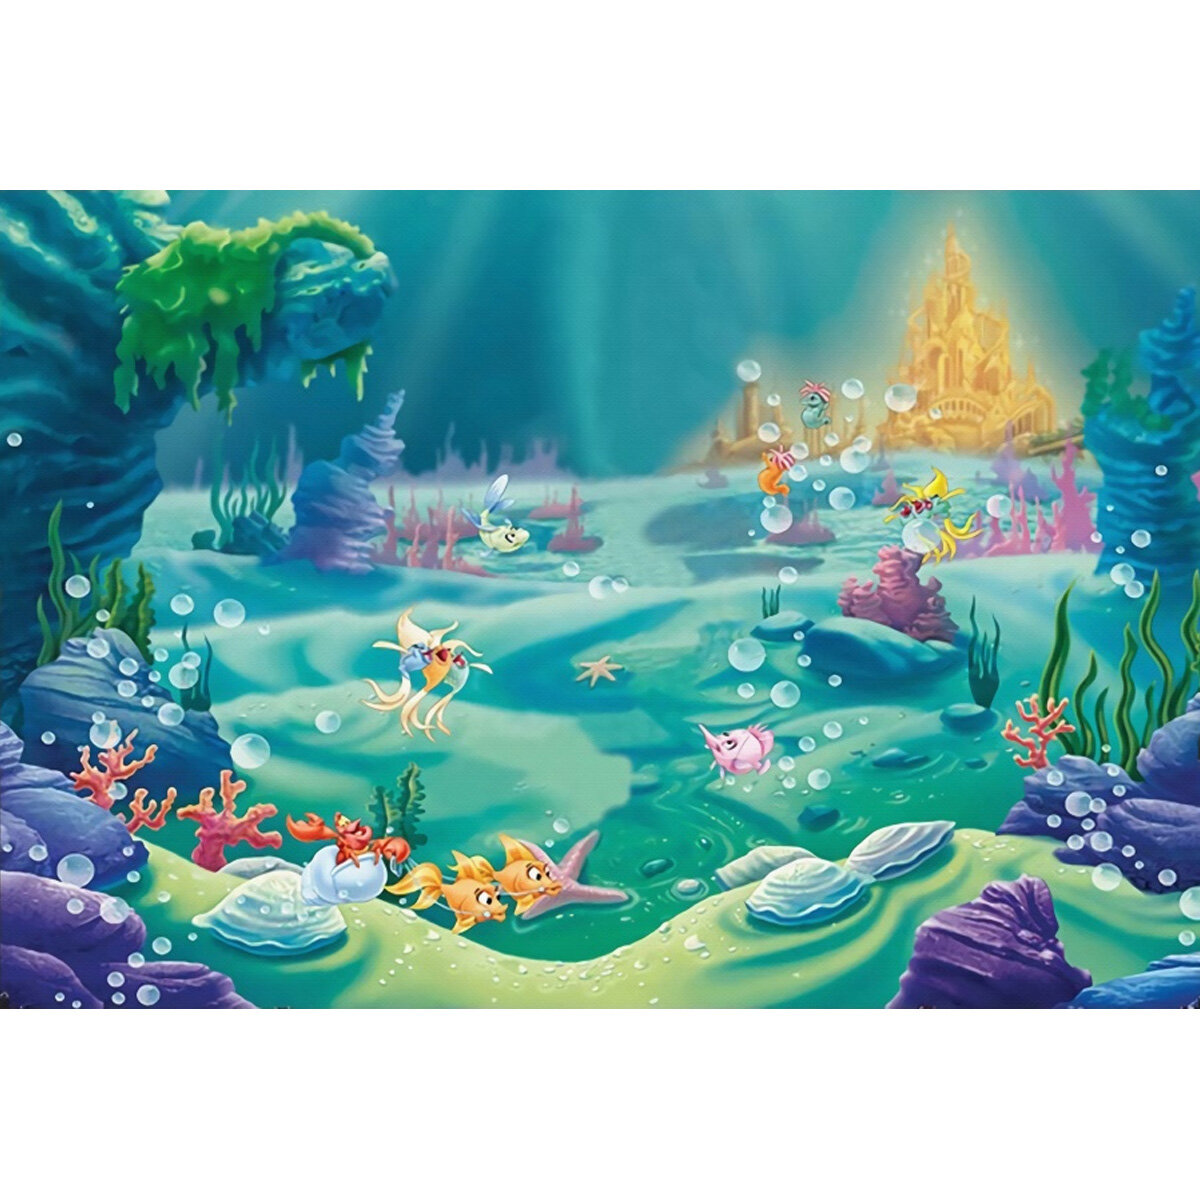 

5x3FT 7x5FT 9x6FT Underwater Castle Fish Studio Photography Backdrops Background